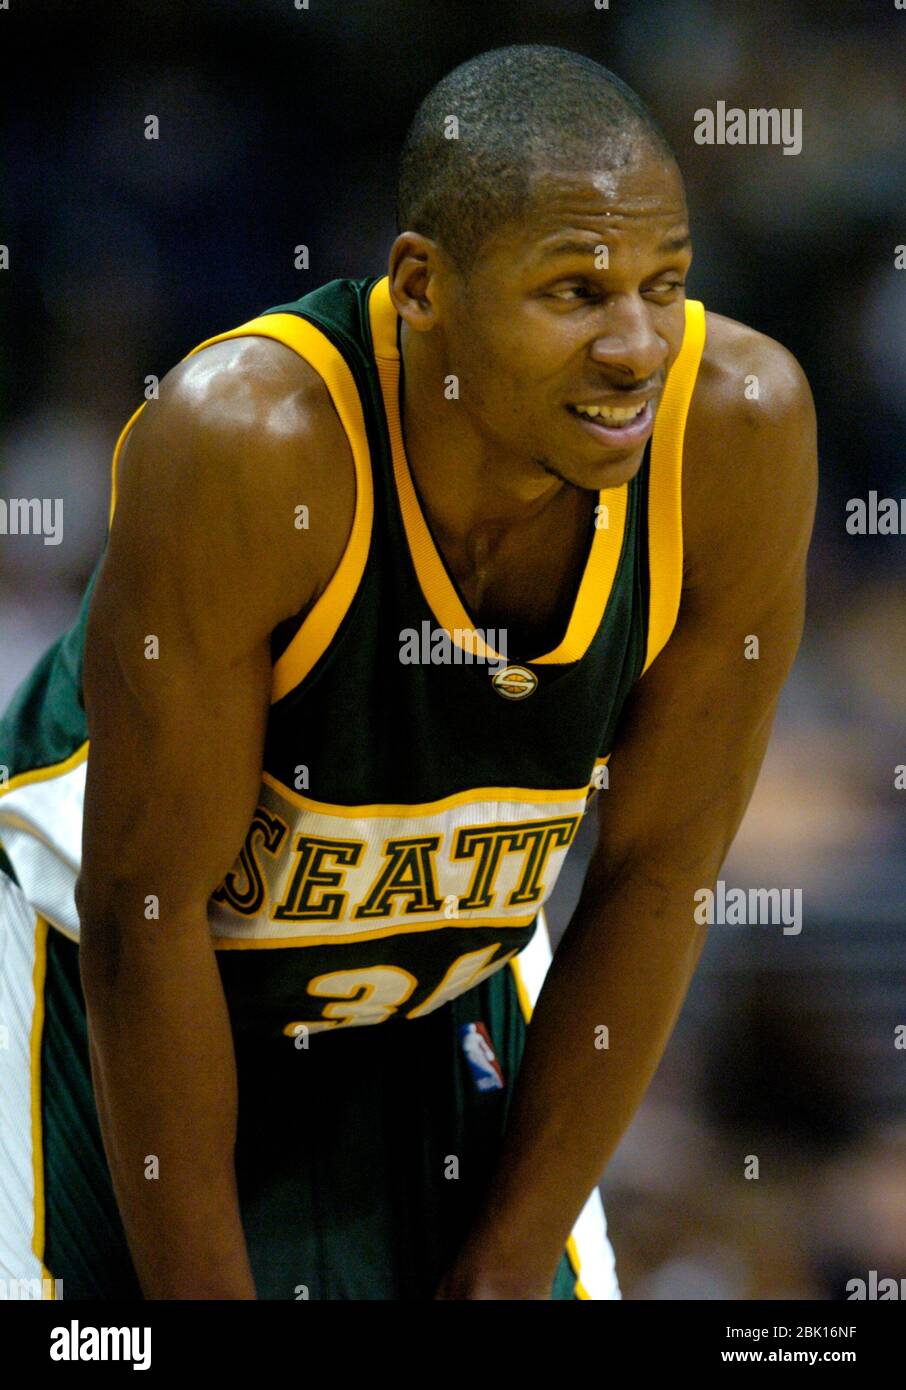 Los Angeles, United States. 28th Jan, 2004. Ray Allen of the